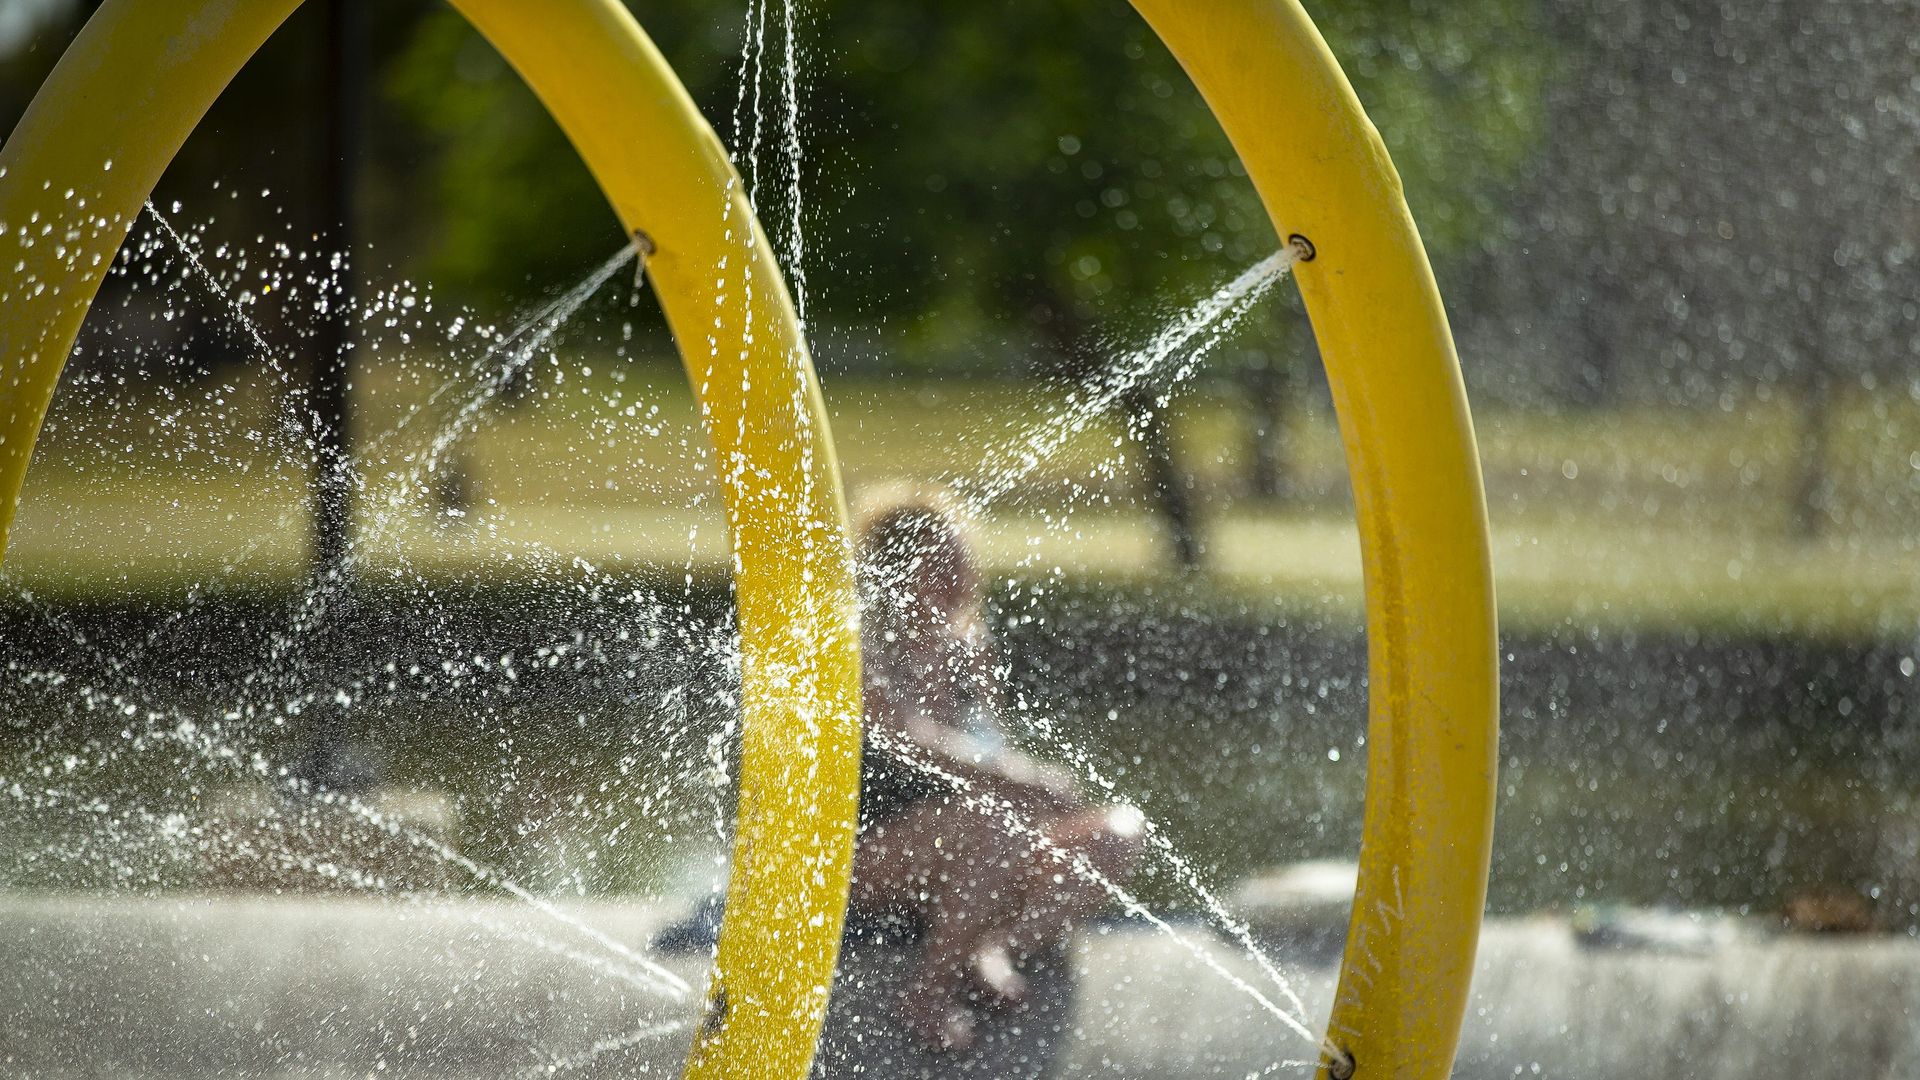 Water spraying from metal hoops at a splash pad in the Phoenix area